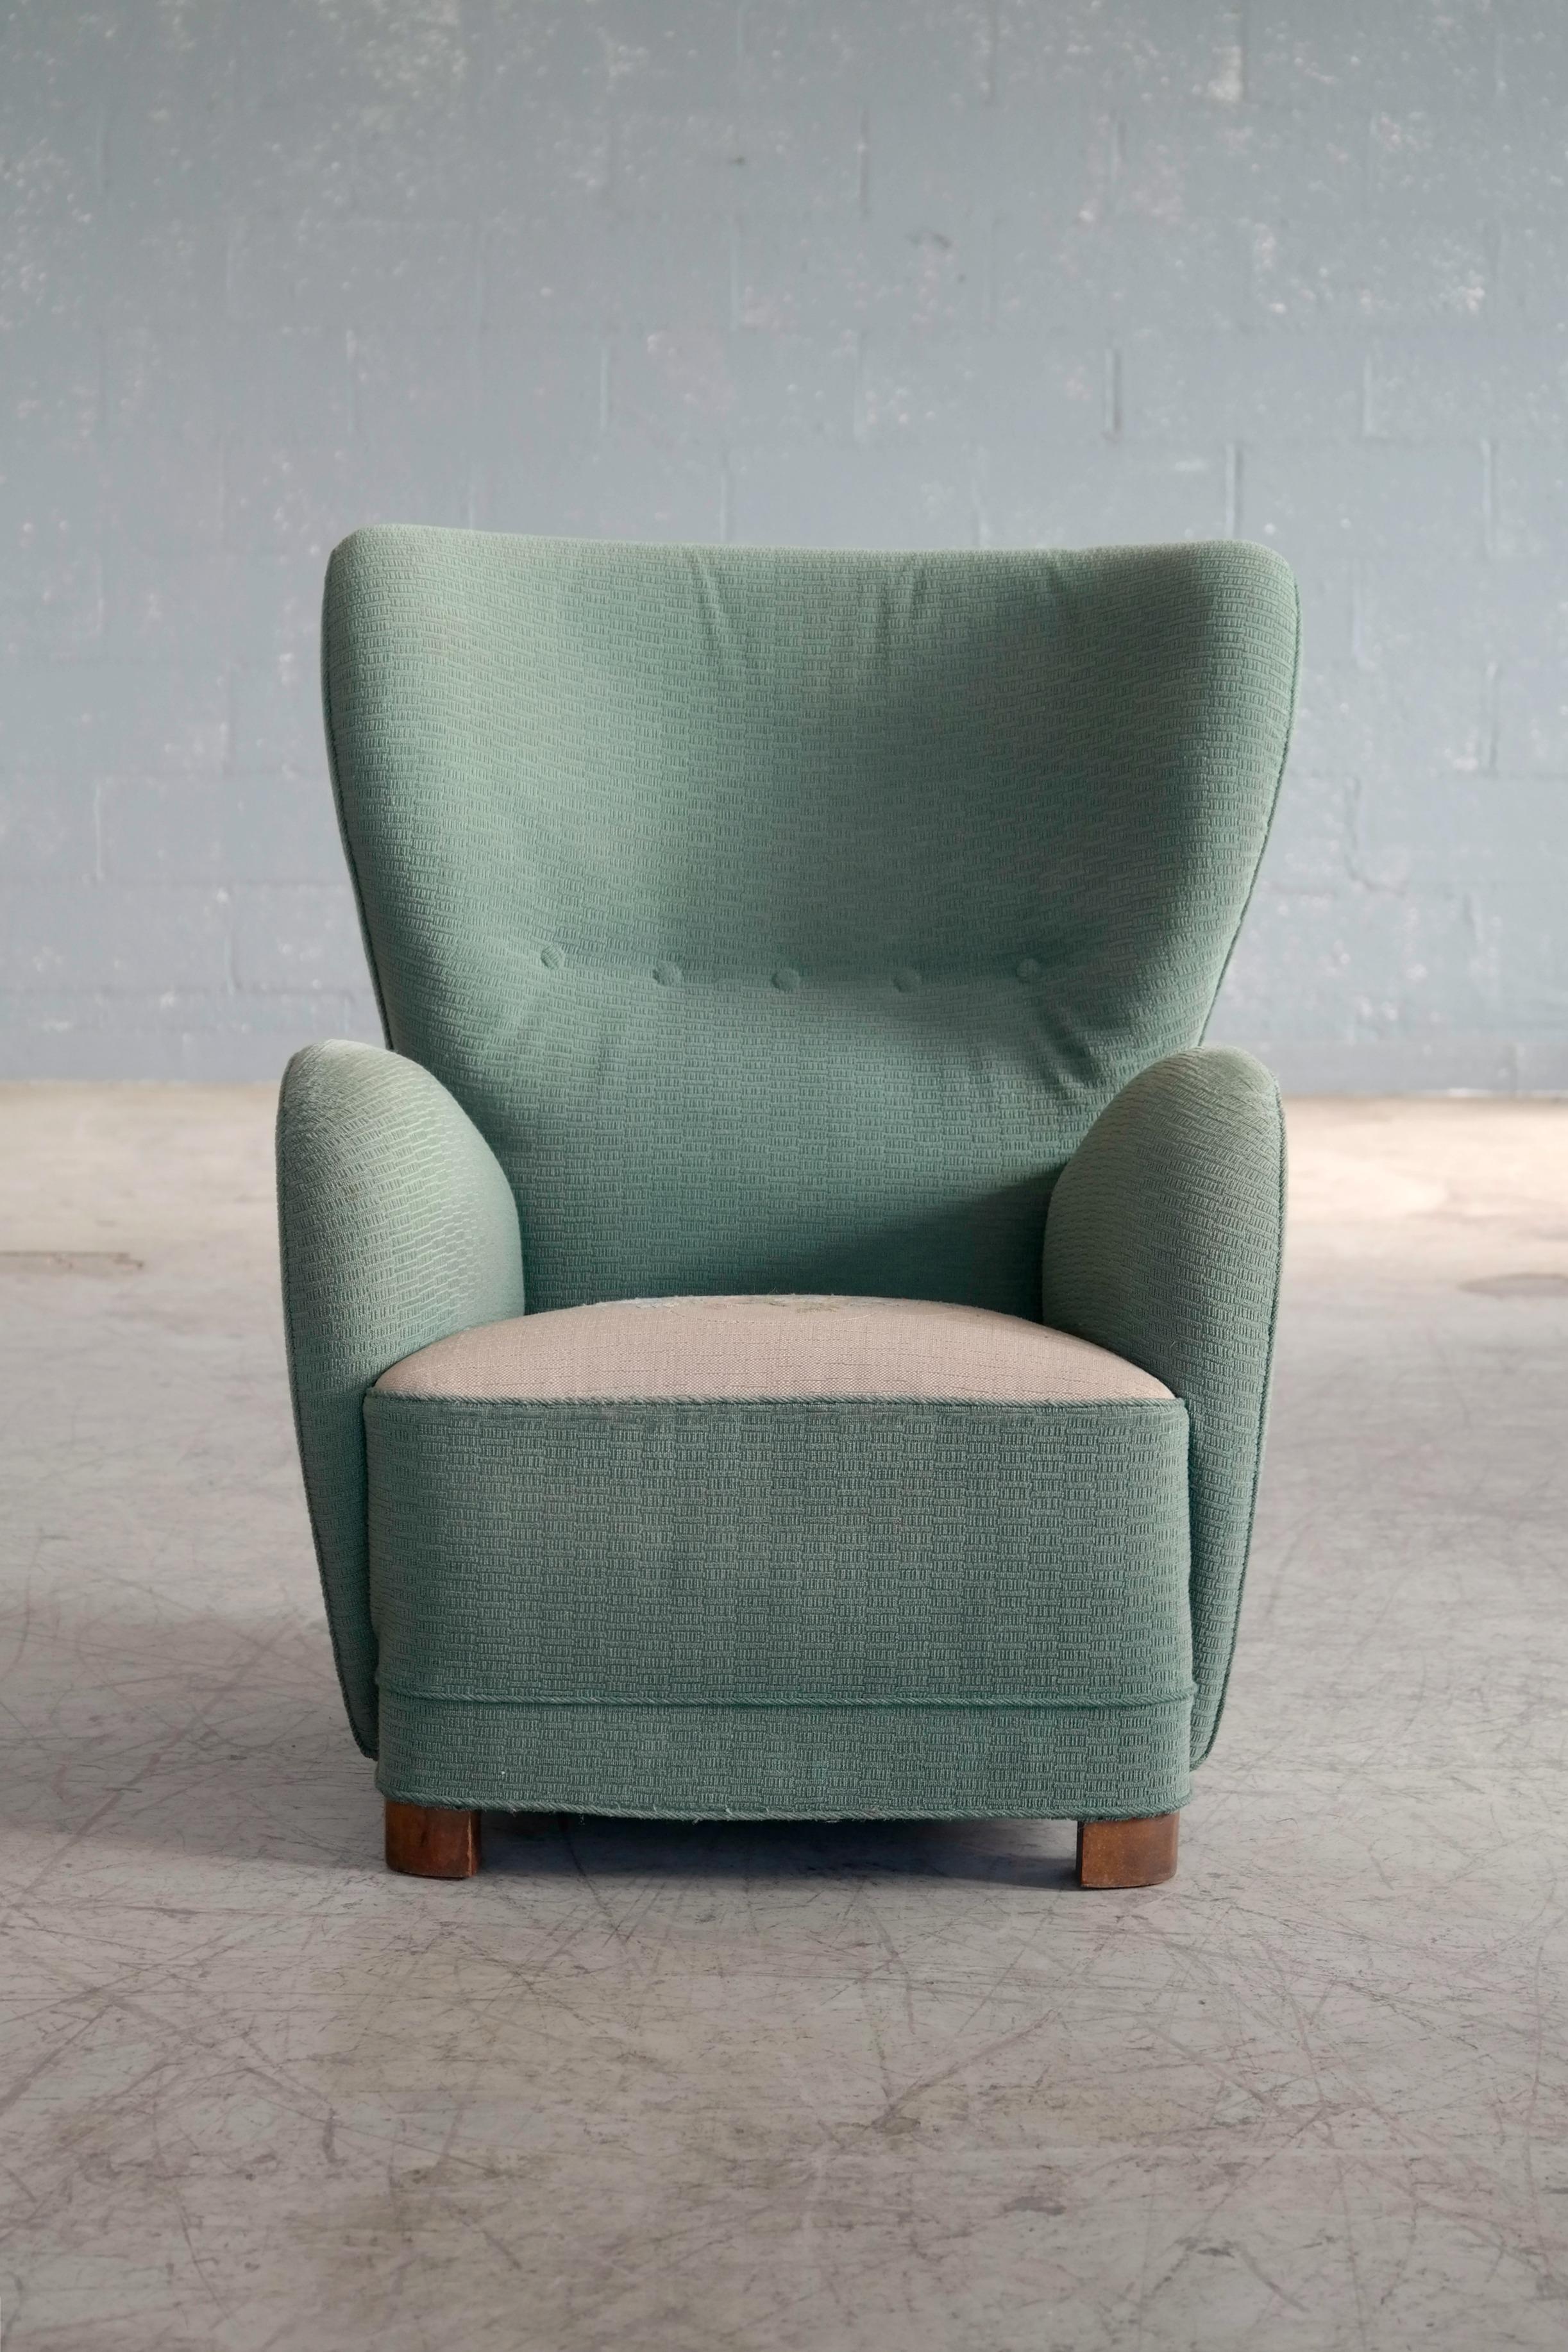 Fantastic Danish 1940s large high back armchair still covered in its original two-tone wool fabric. Great statement piece for any room. The chair is much in the style of Viggo Boesen and Flemming Lasssen especially with the rounded armrests the